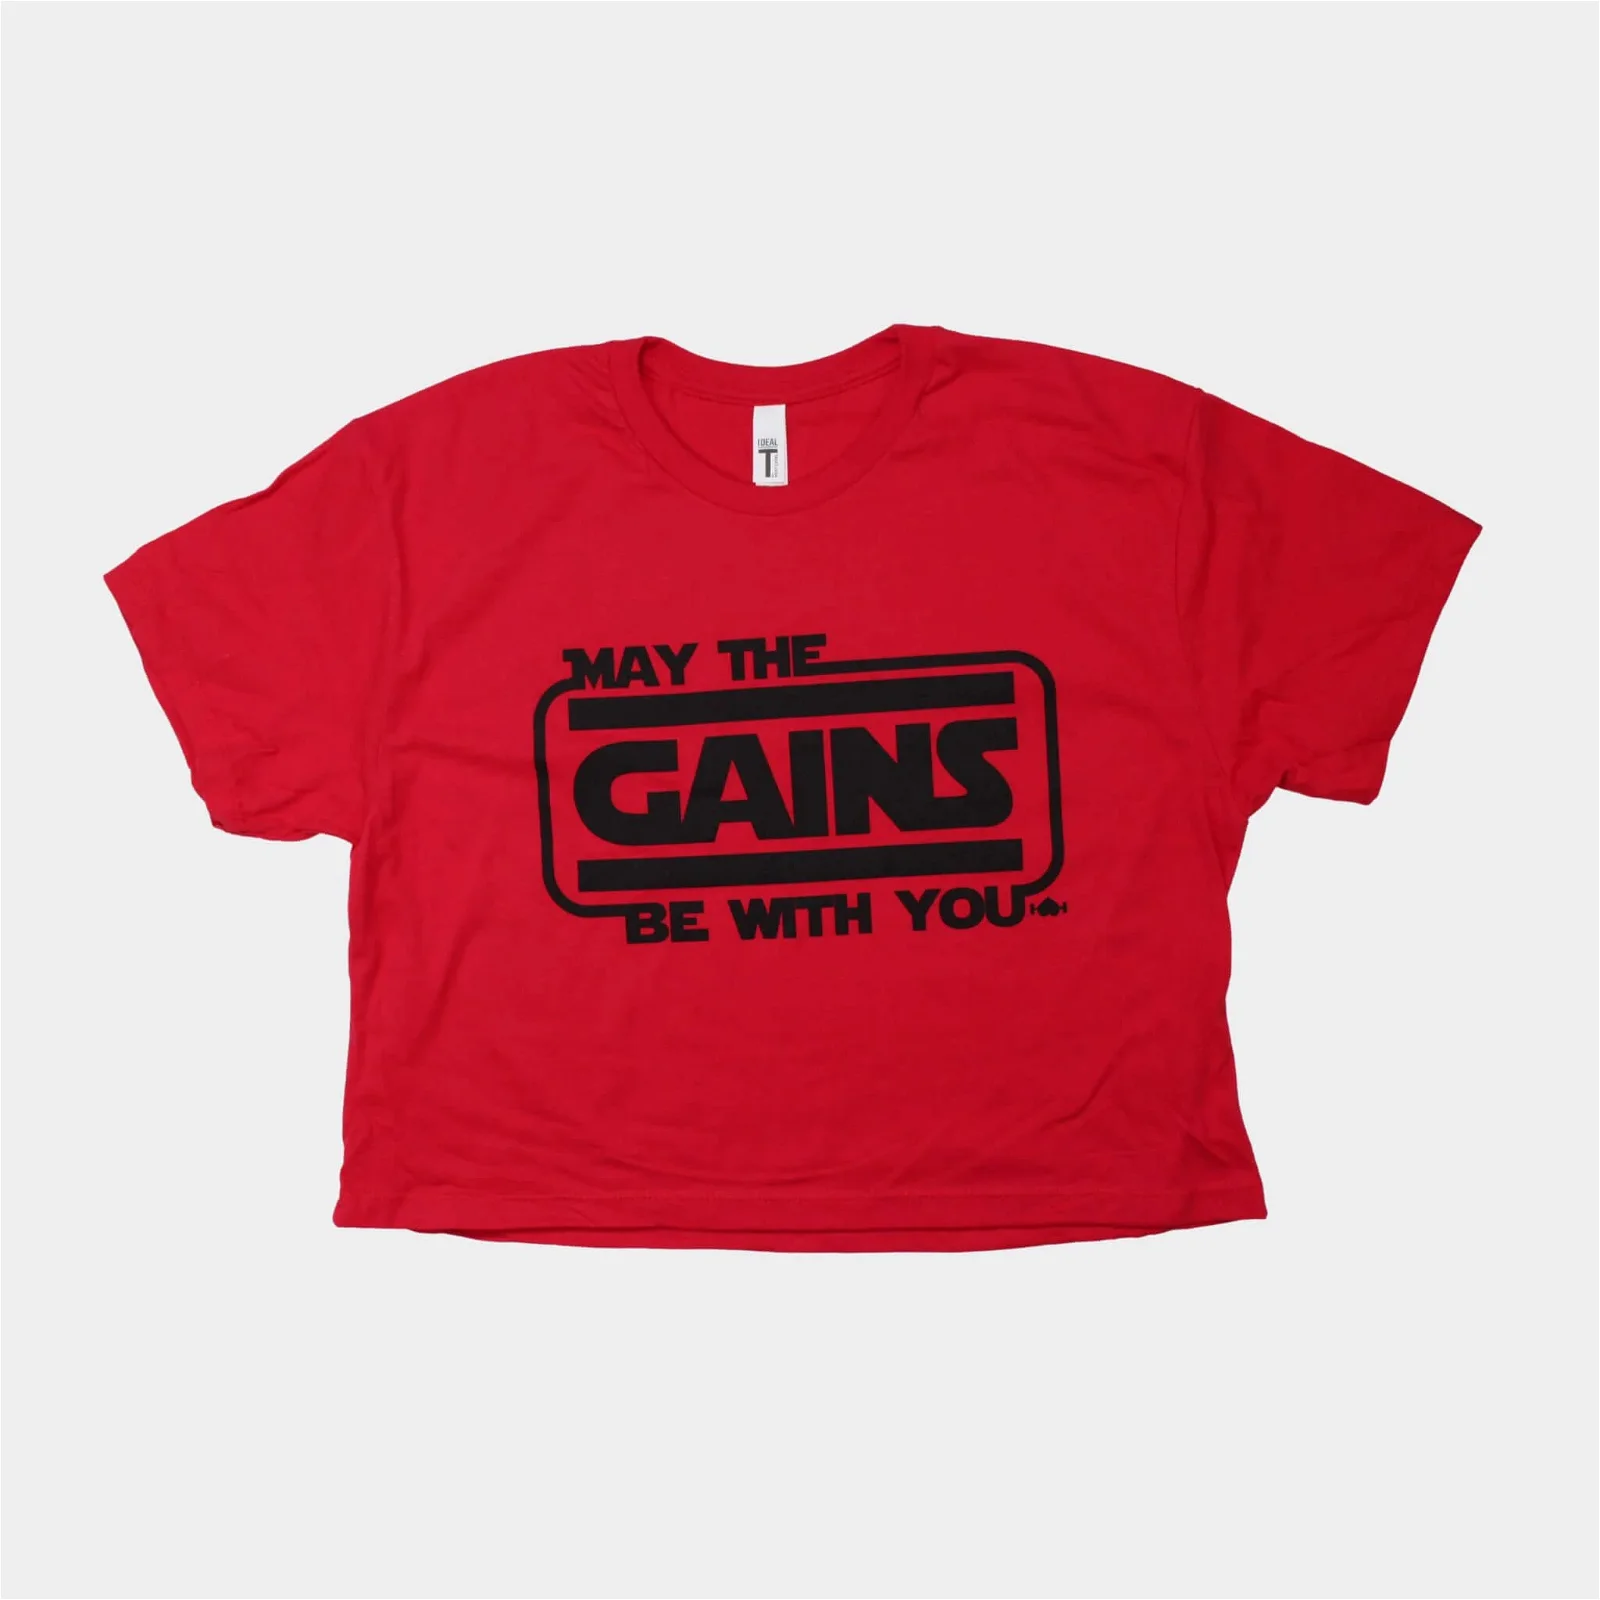 Image of May the Gains be with You Top